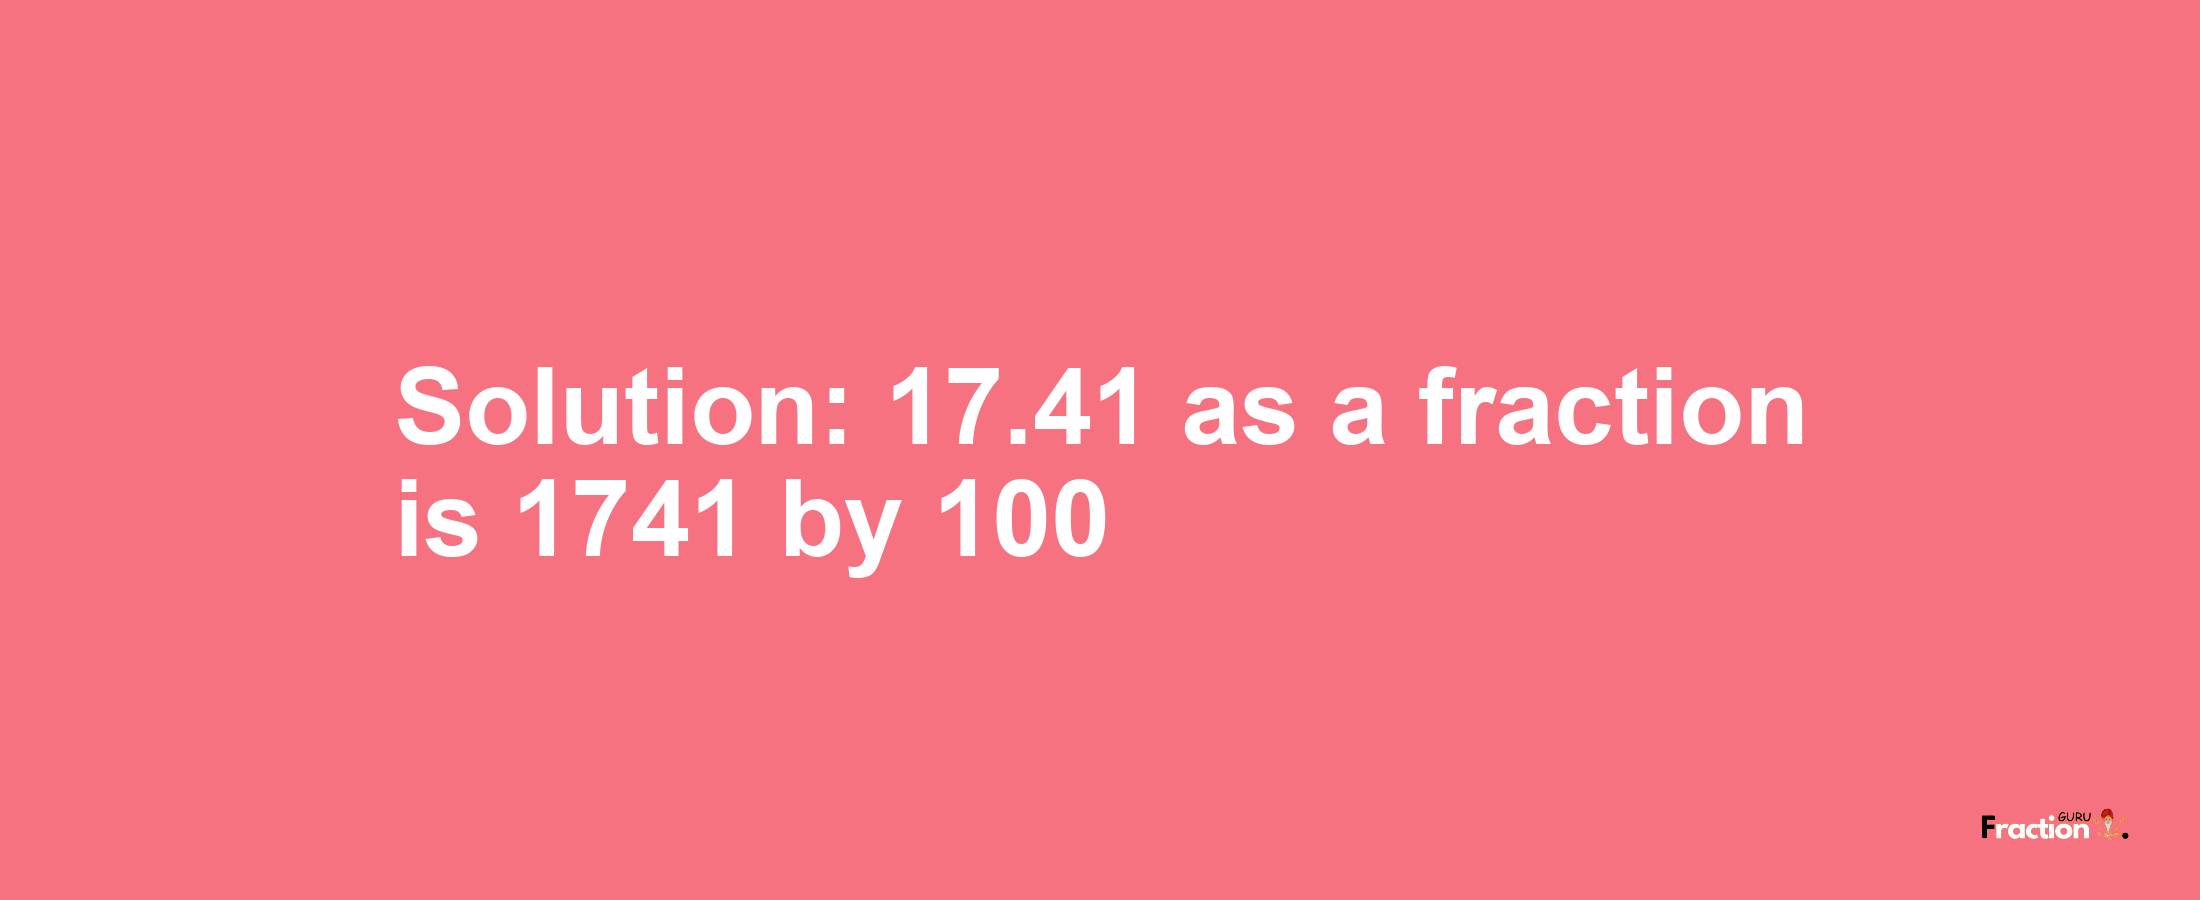 Solution:17.41 as a fraction is 1741/100